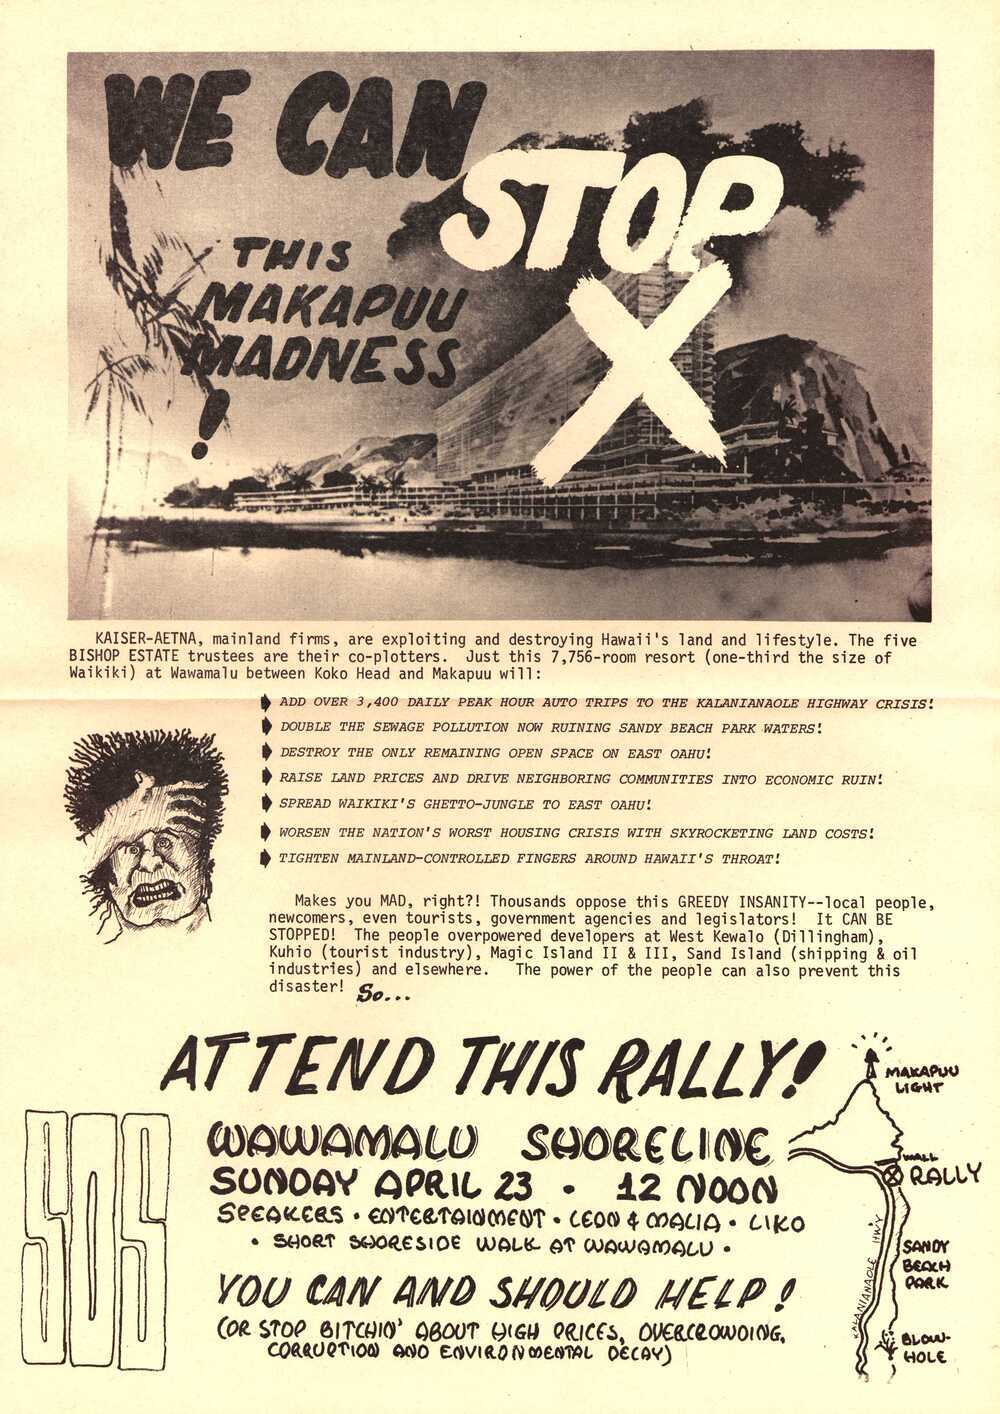  John Kelly, "We can stop this Makapuu madness!" (c. 1970)